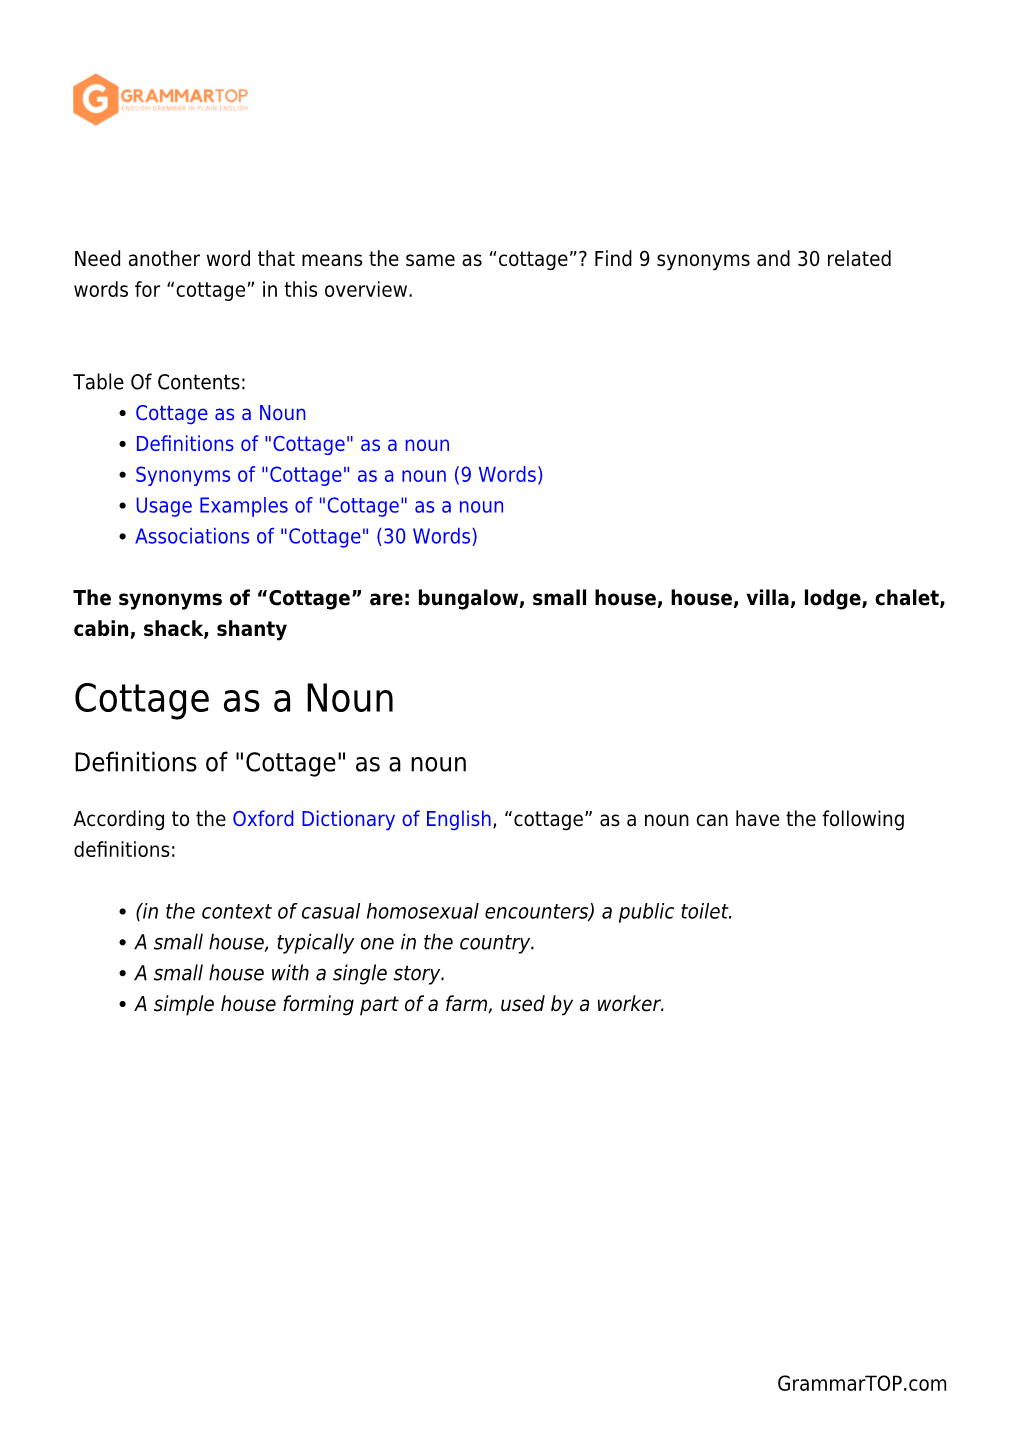 Cottage”? Find 9 Synonyms and 30 Related Words for “Cottage” in This Overview